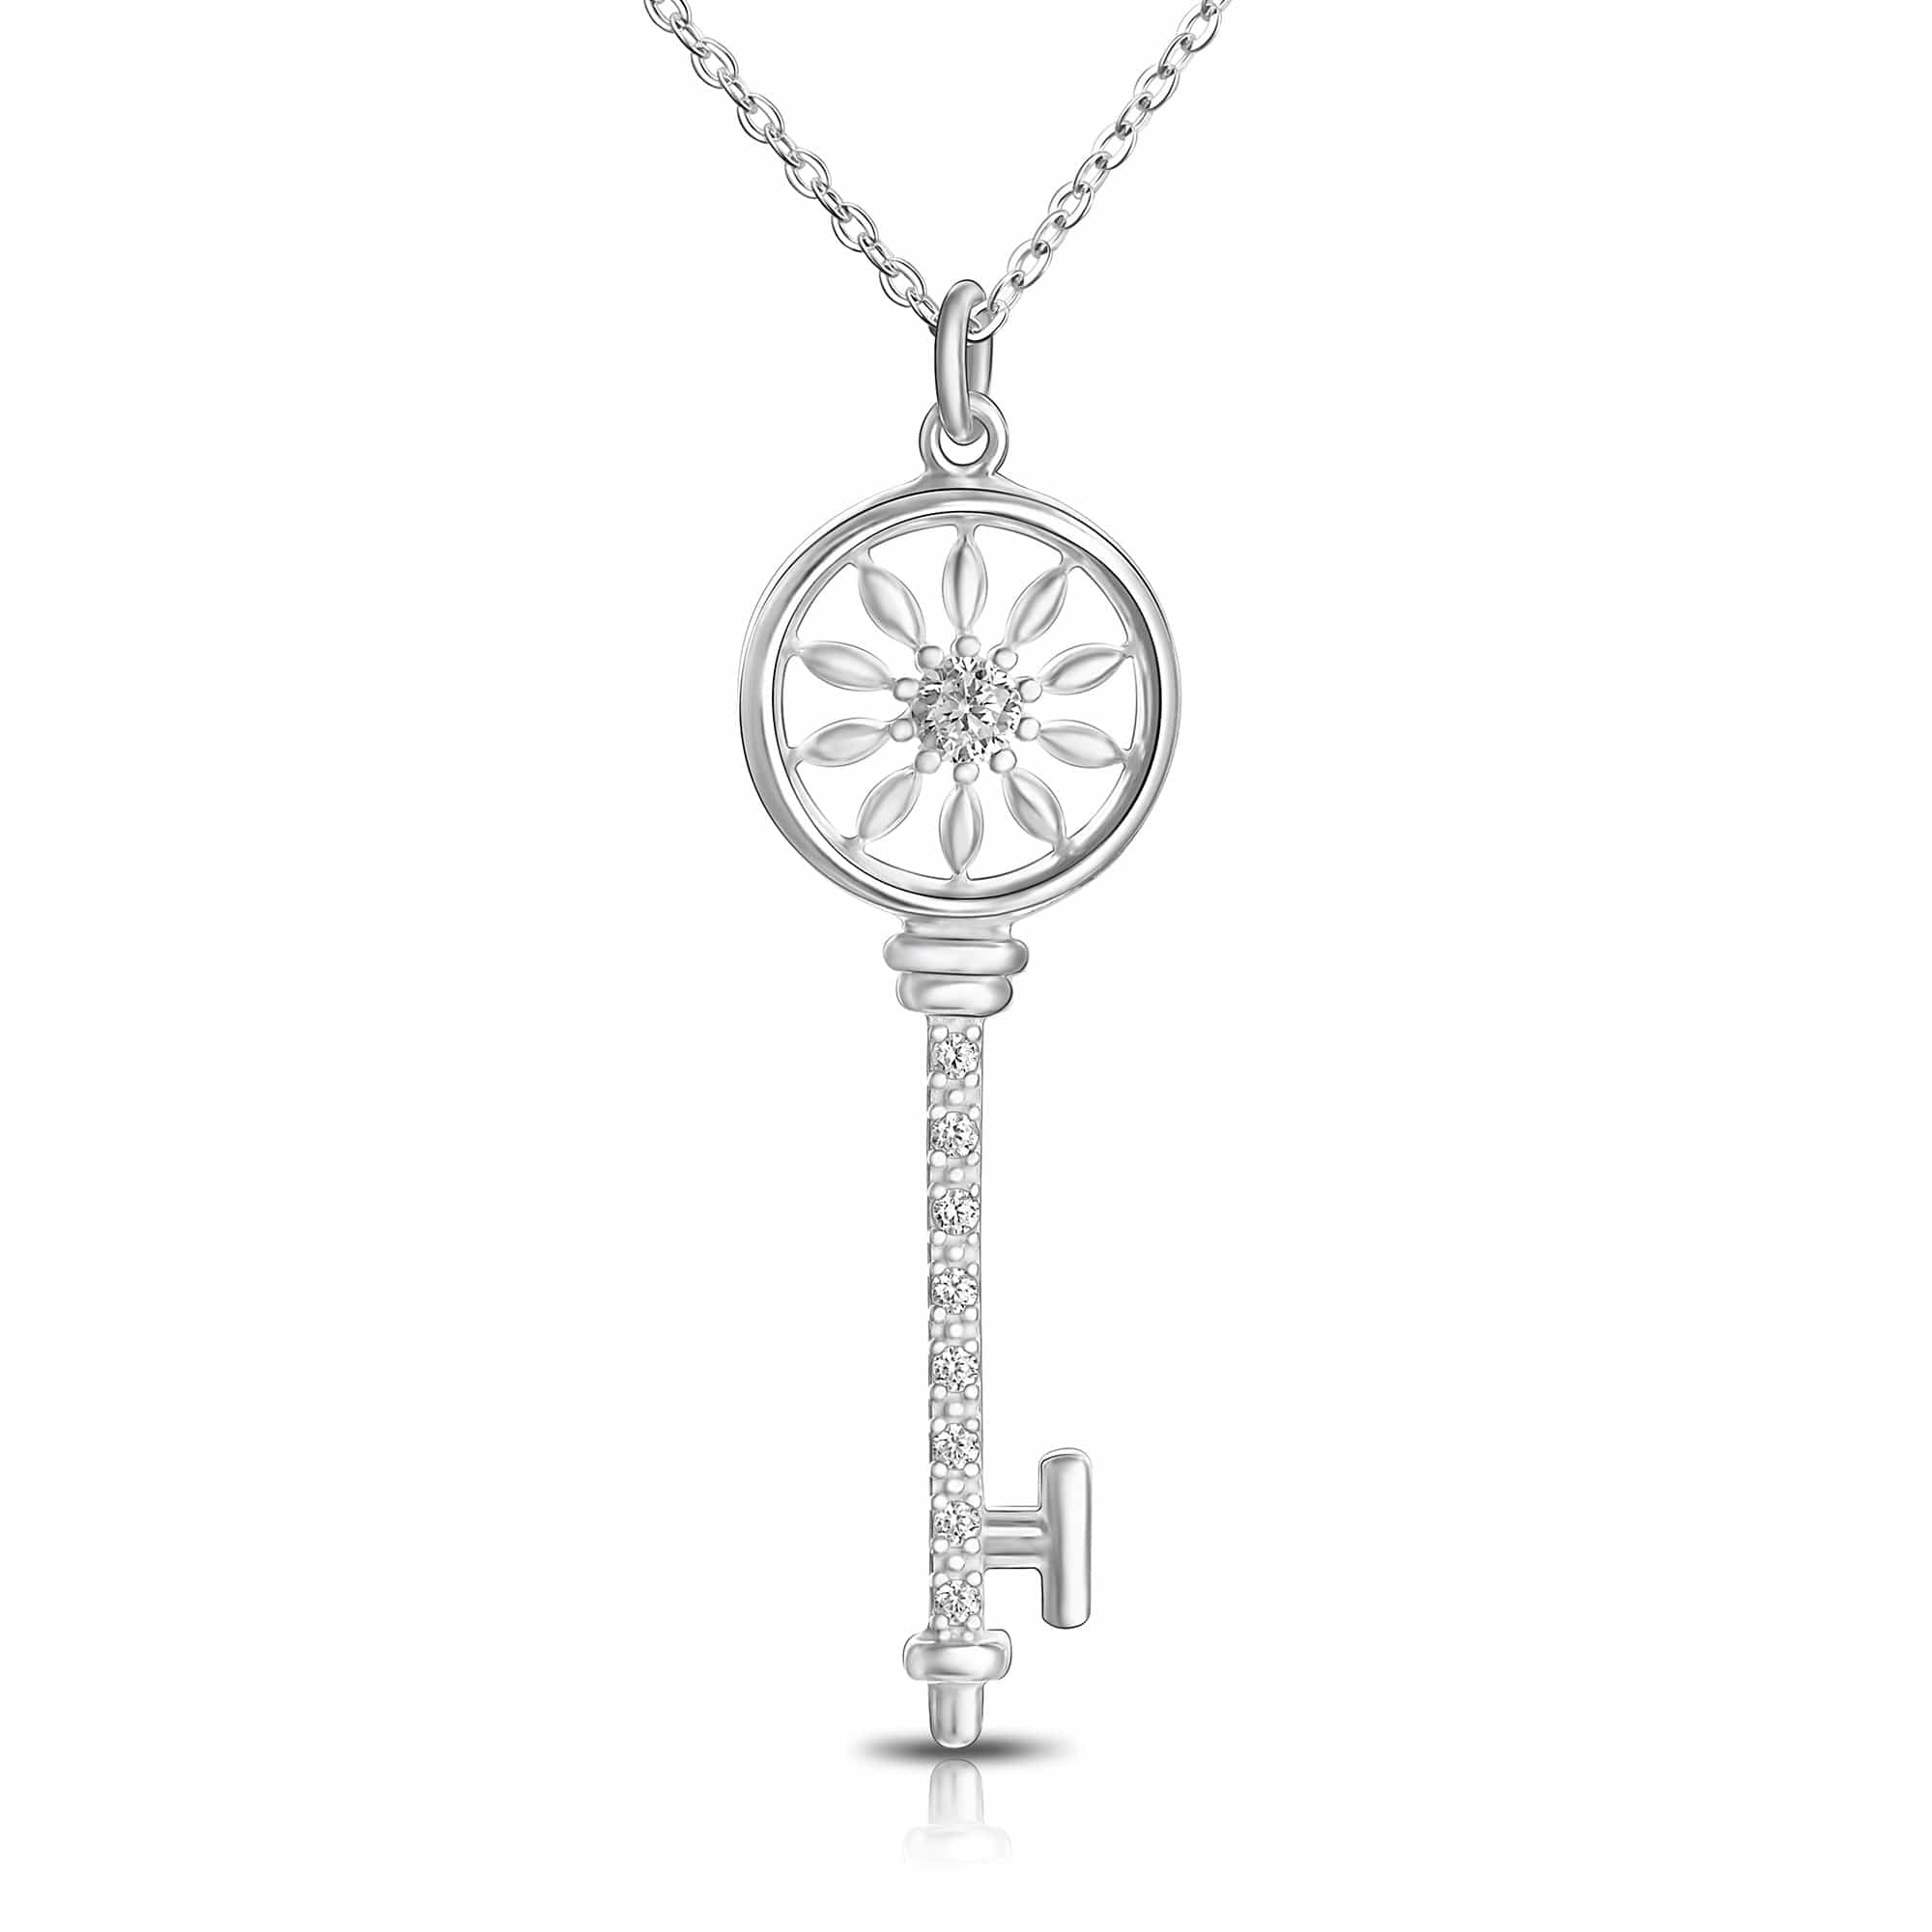 Large Silver Compass Necklace - Tilly Sveaas Jewellery